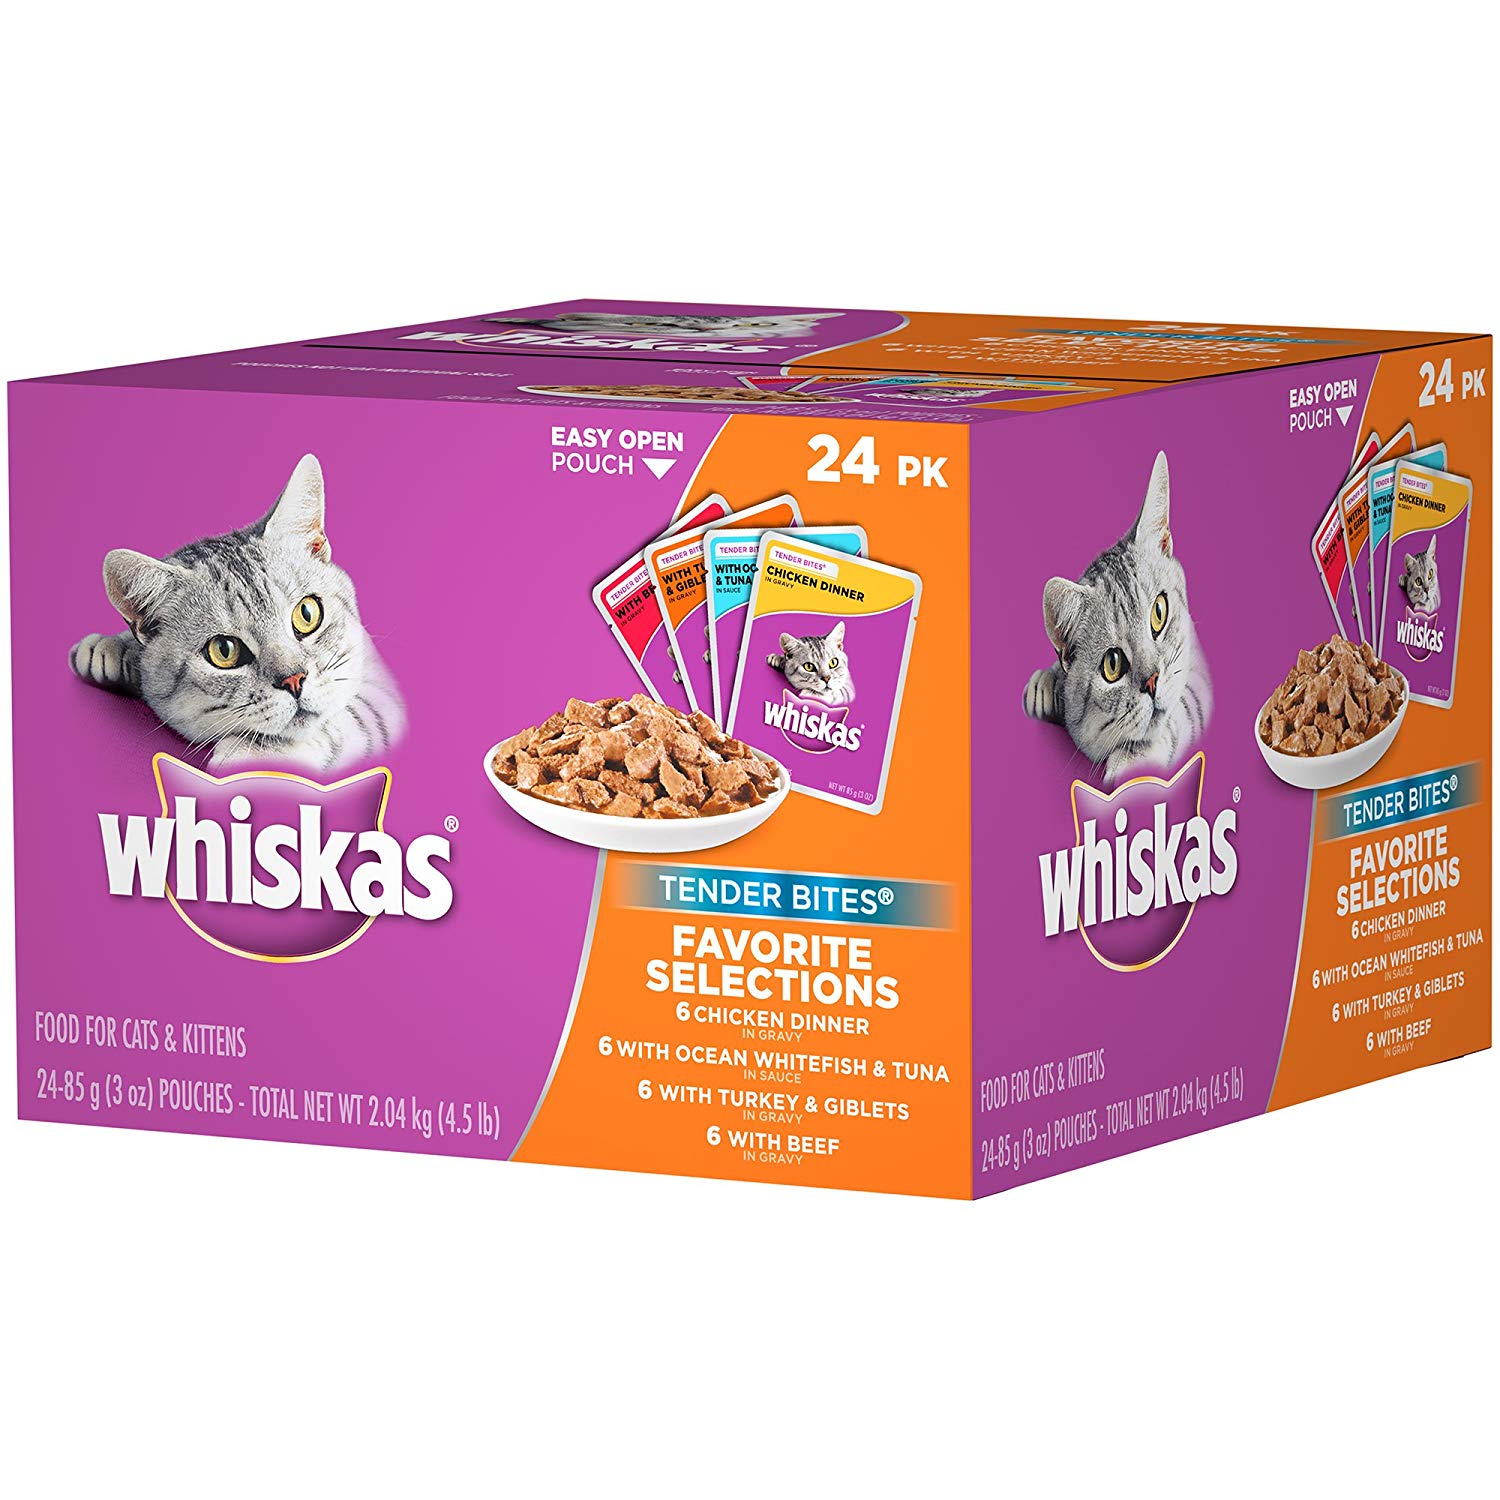 Whiskas Tender Bites Favorite Selections Wet Cat Food Pouches 24ct as